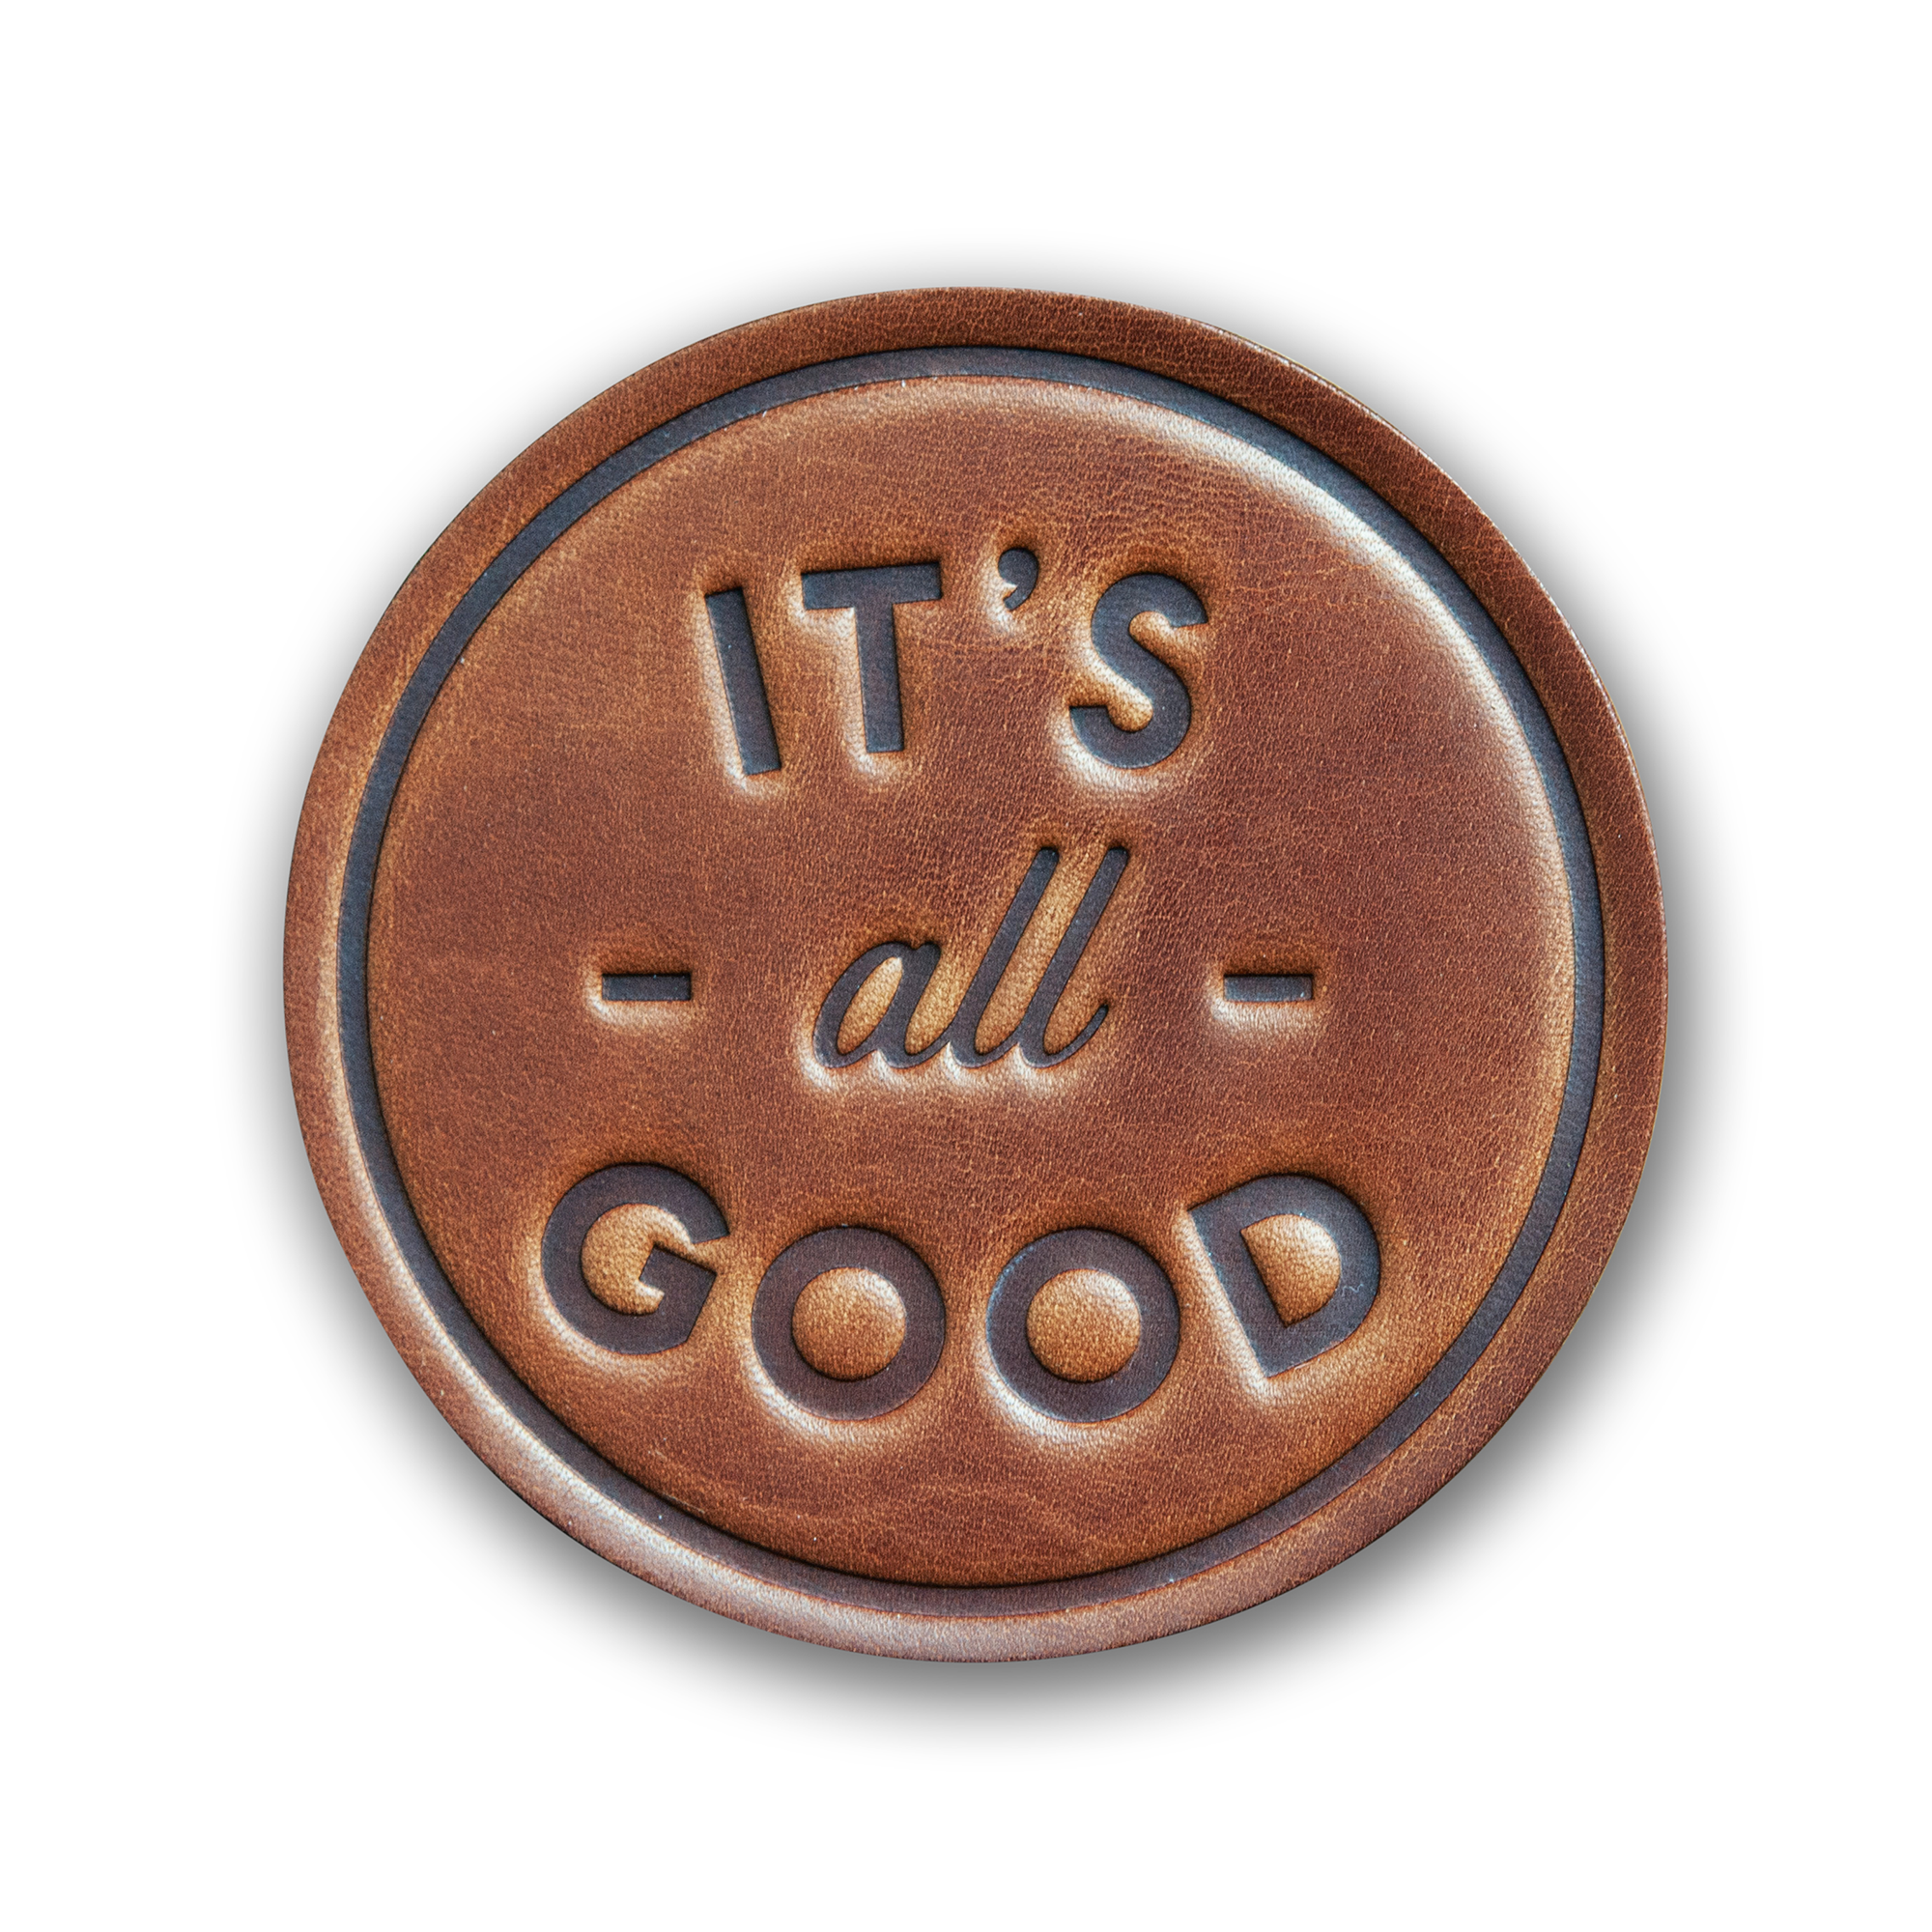 It's all Good Leather Coaster